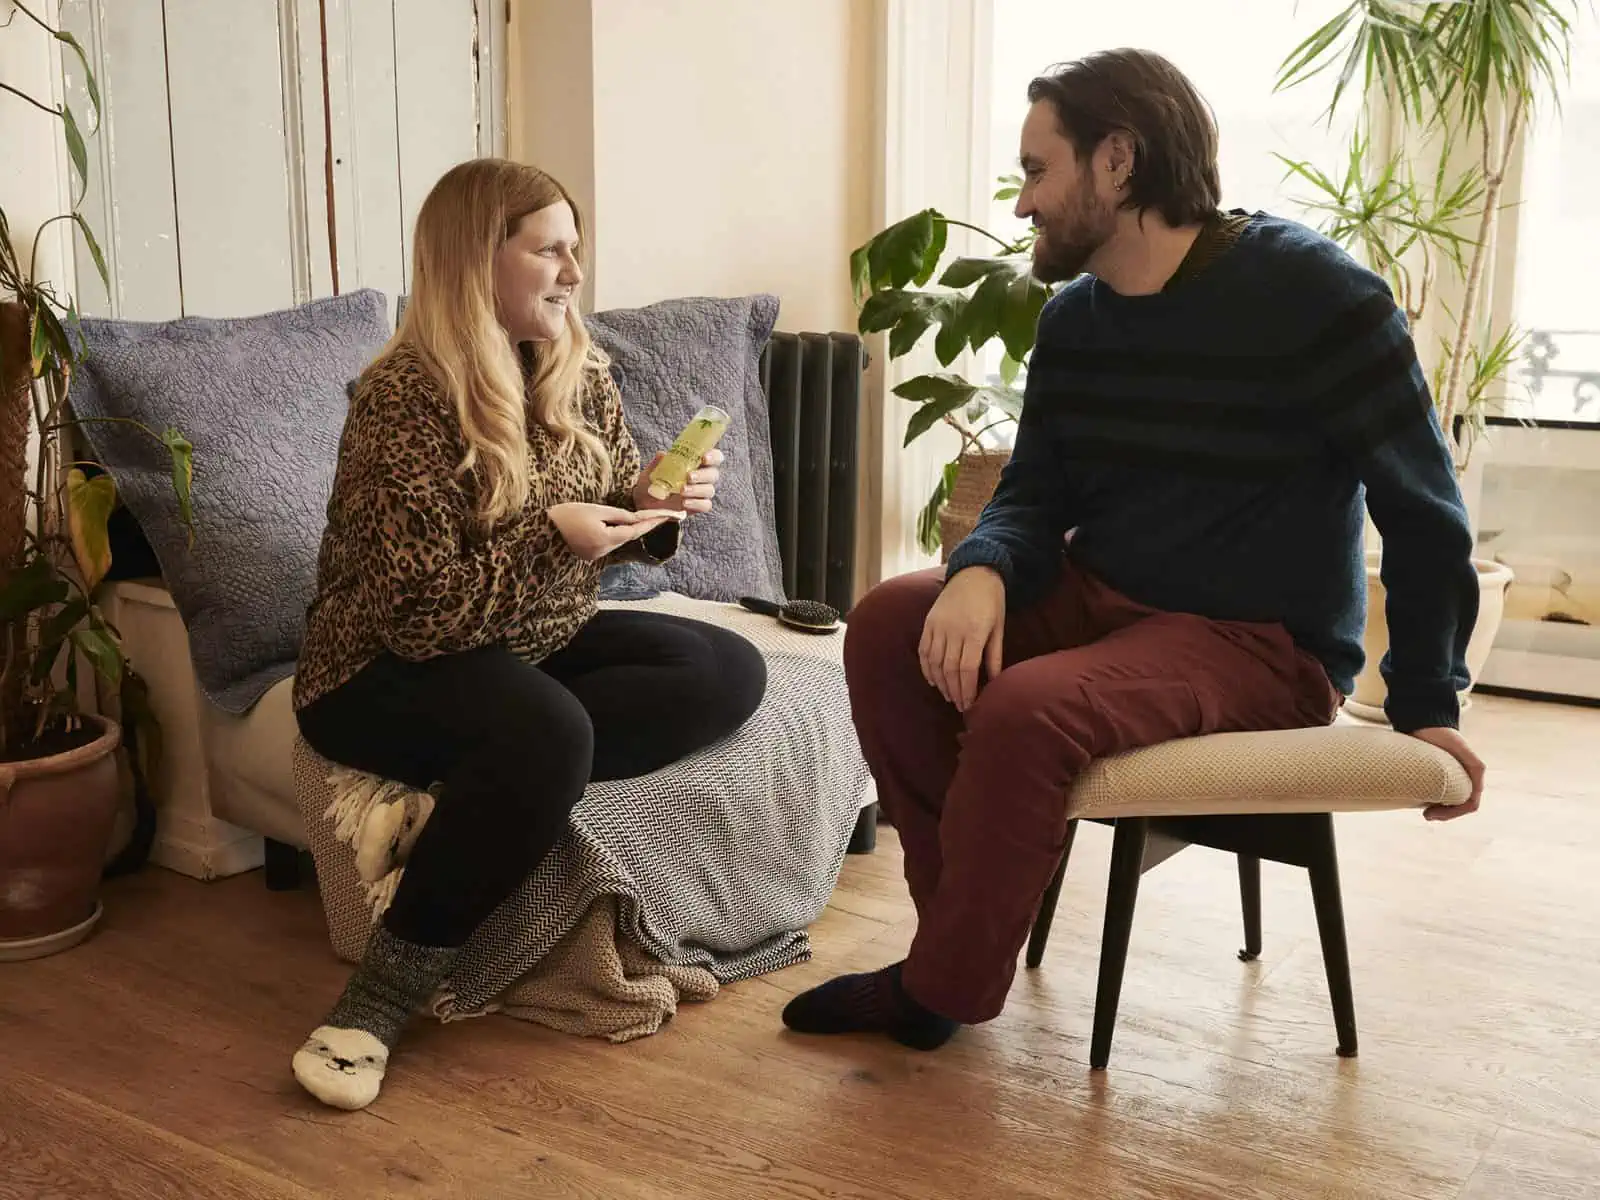 Image Descrition: a landscape format image.&nbsp;&nbsp;Fay and Matt sit on a chair and small stool in a bright, airy room, surrounded by plants.&nbsp;&nbsp;Fay is wearing a leopard print top, black leggings and woolly socks and is using an Avon prod…